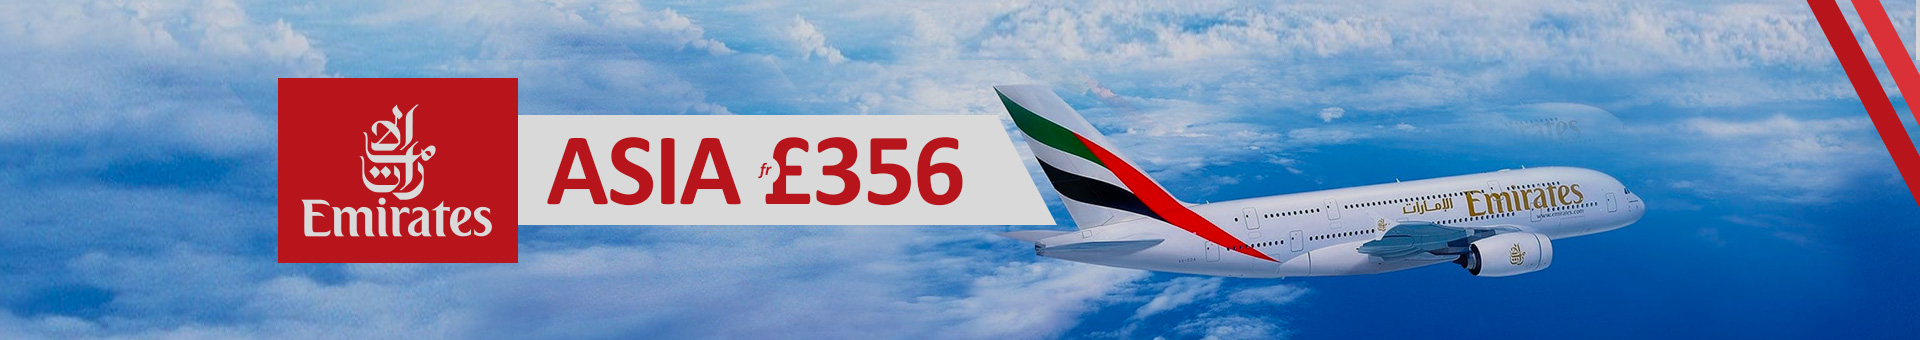 cheap airline tickets emirates